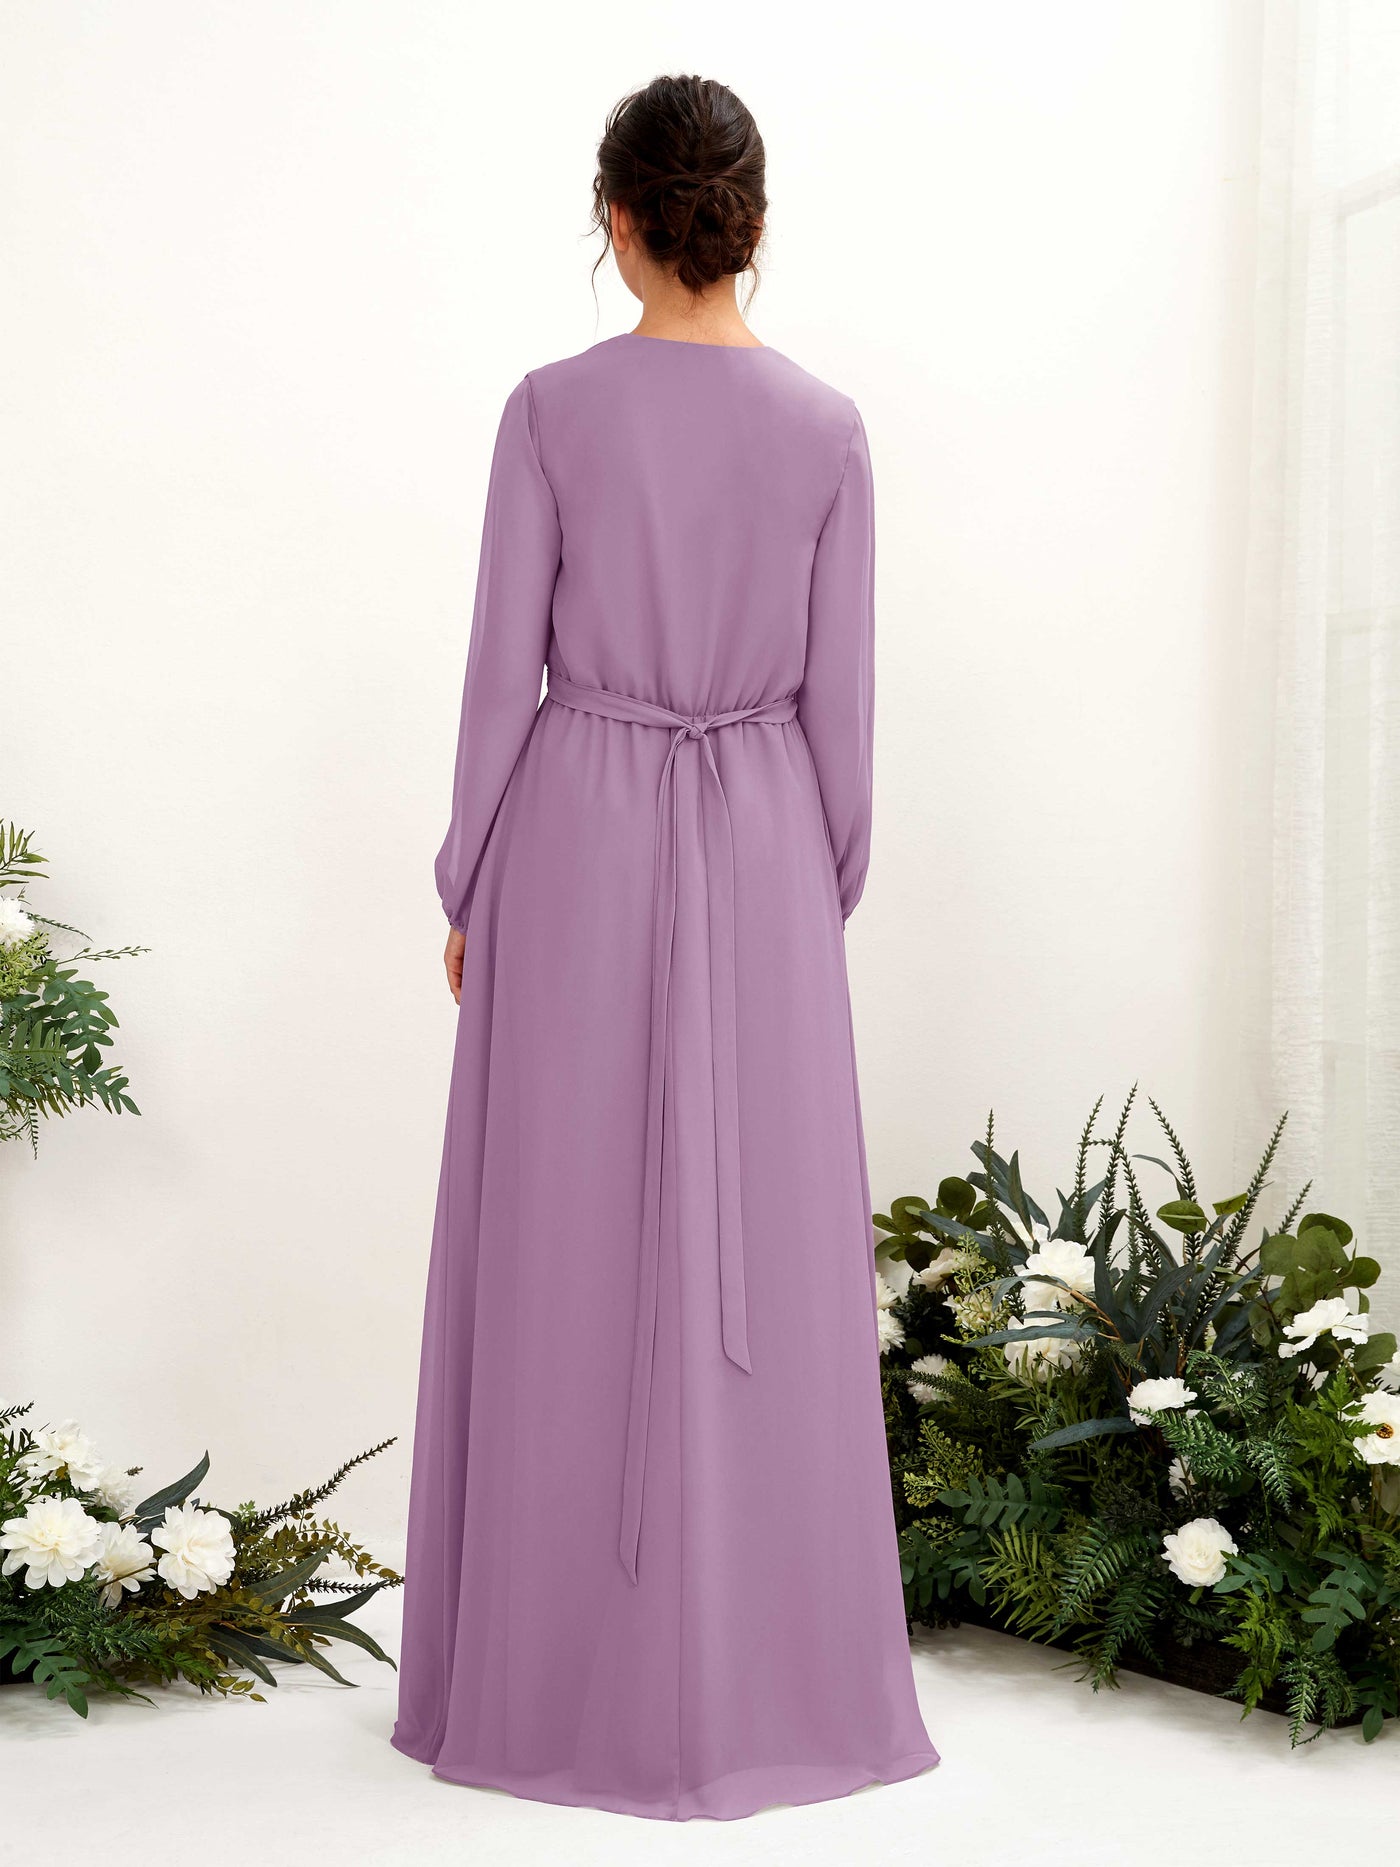 Orchid Mist Bridesmaid Dresses Bridesmaid Dress A-line Chiffon V-neck Full Length Long Sleeves Wedding Party Dress (81223221)#color_orchid-mist